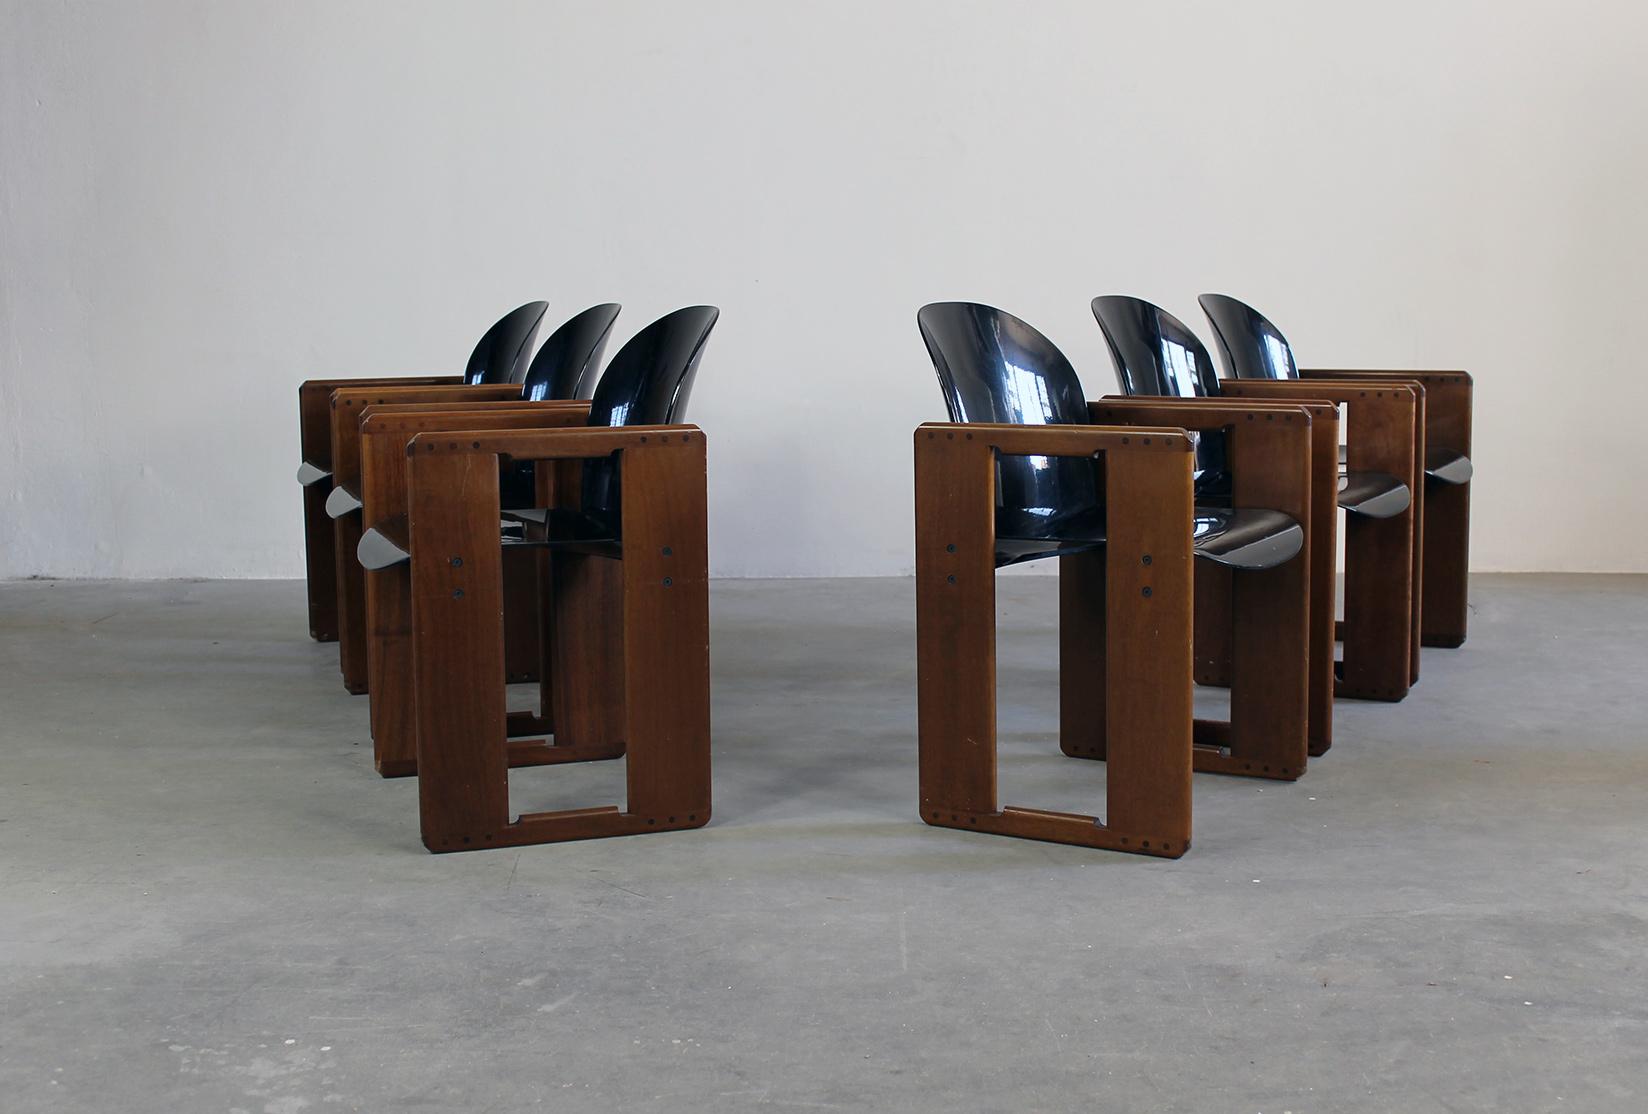 Set of six Dialogo chairs with structure in wood, seat and back in black fiberglass and metal details. 
Designed by Tobia & Afra Scarpa and produced by B&B Italia in 1973. 

The Dialogo chair present a peculiar geometric frame in wood to which the